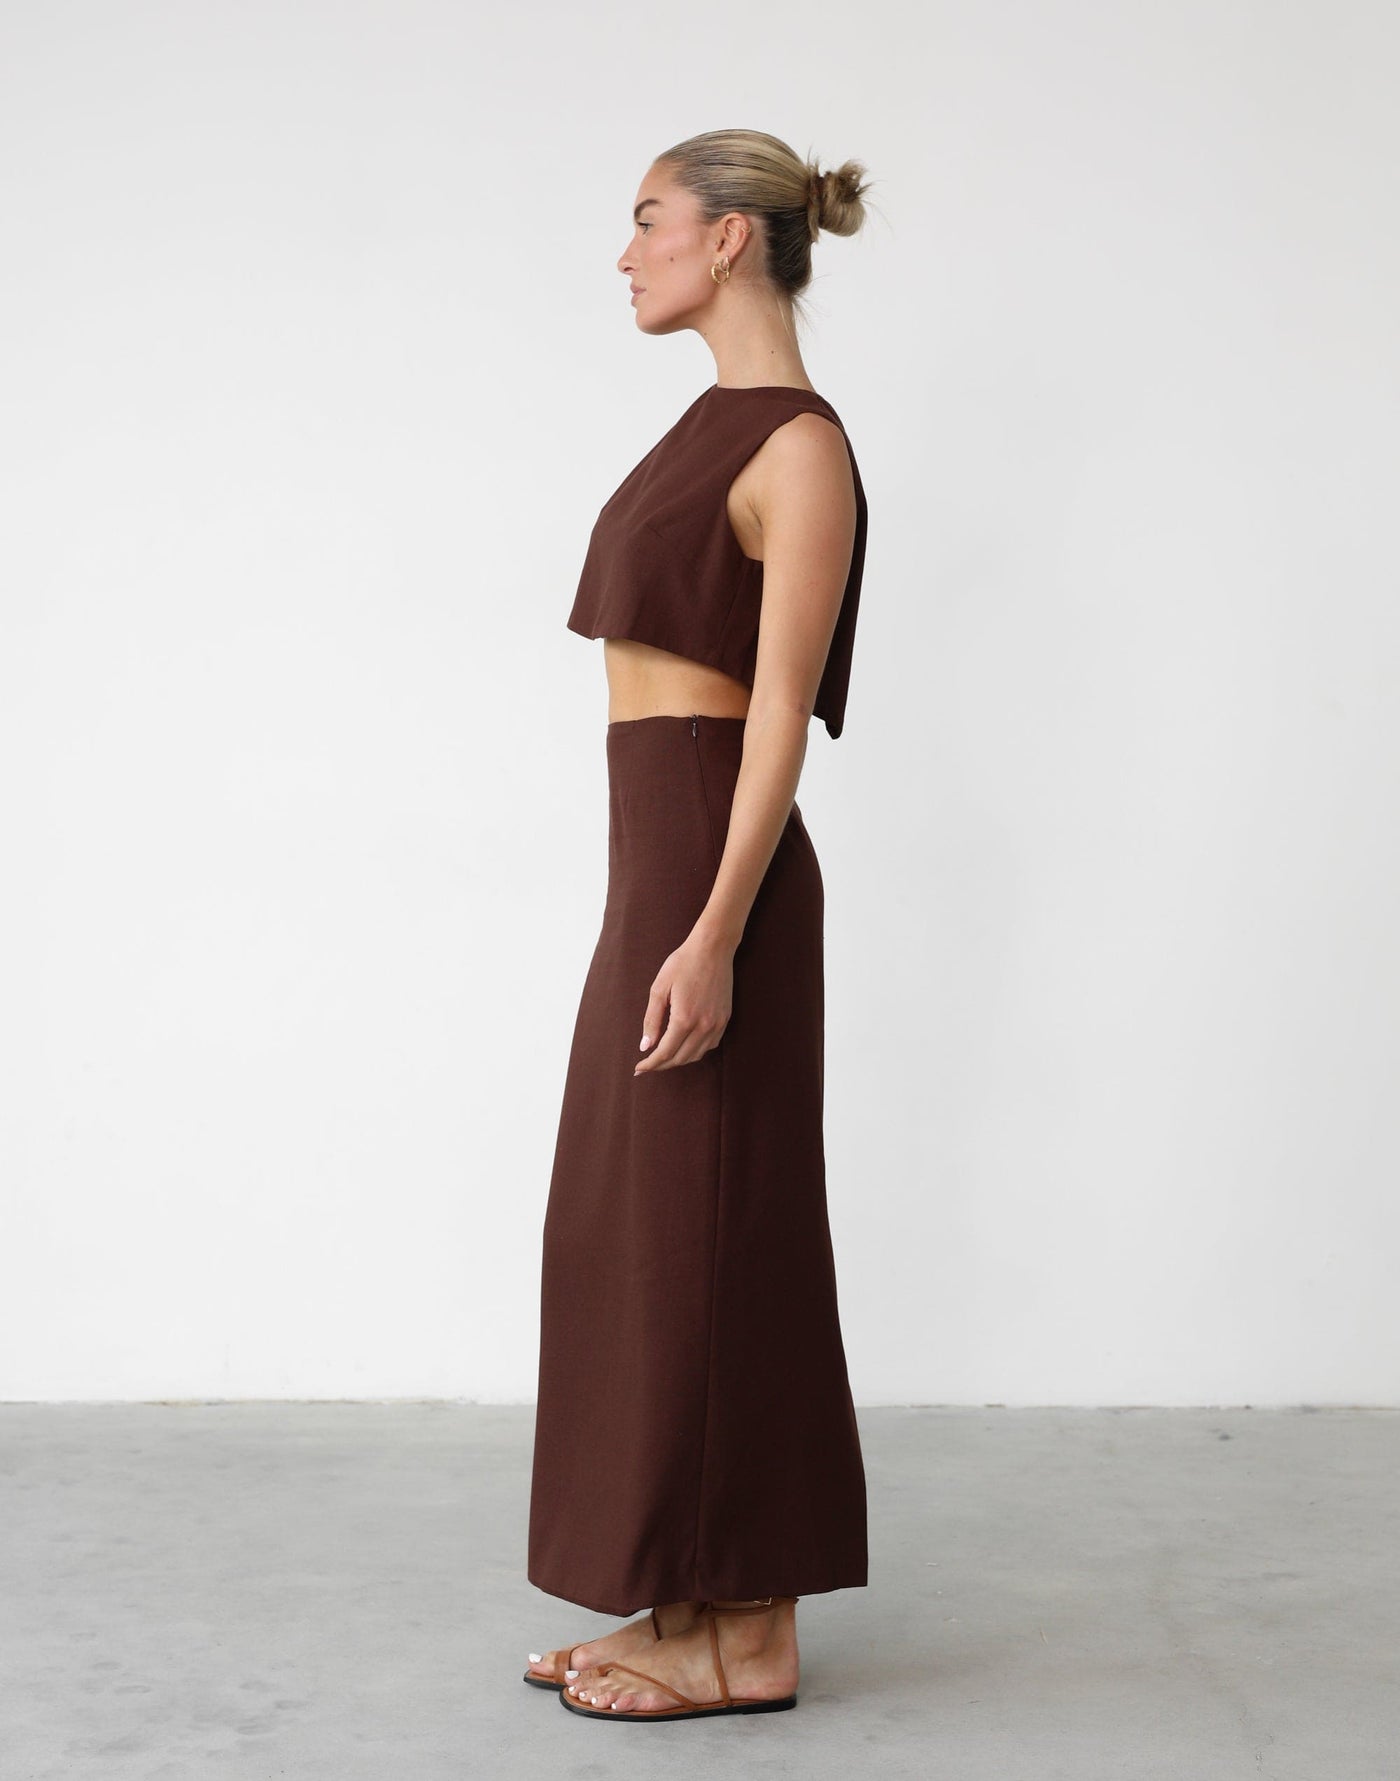 Cleo Linen Maxi Skirt (Cocoa) - High Rise Fitted Flared Maxi Skirt - Women's Skirt - Charcoal Clothing